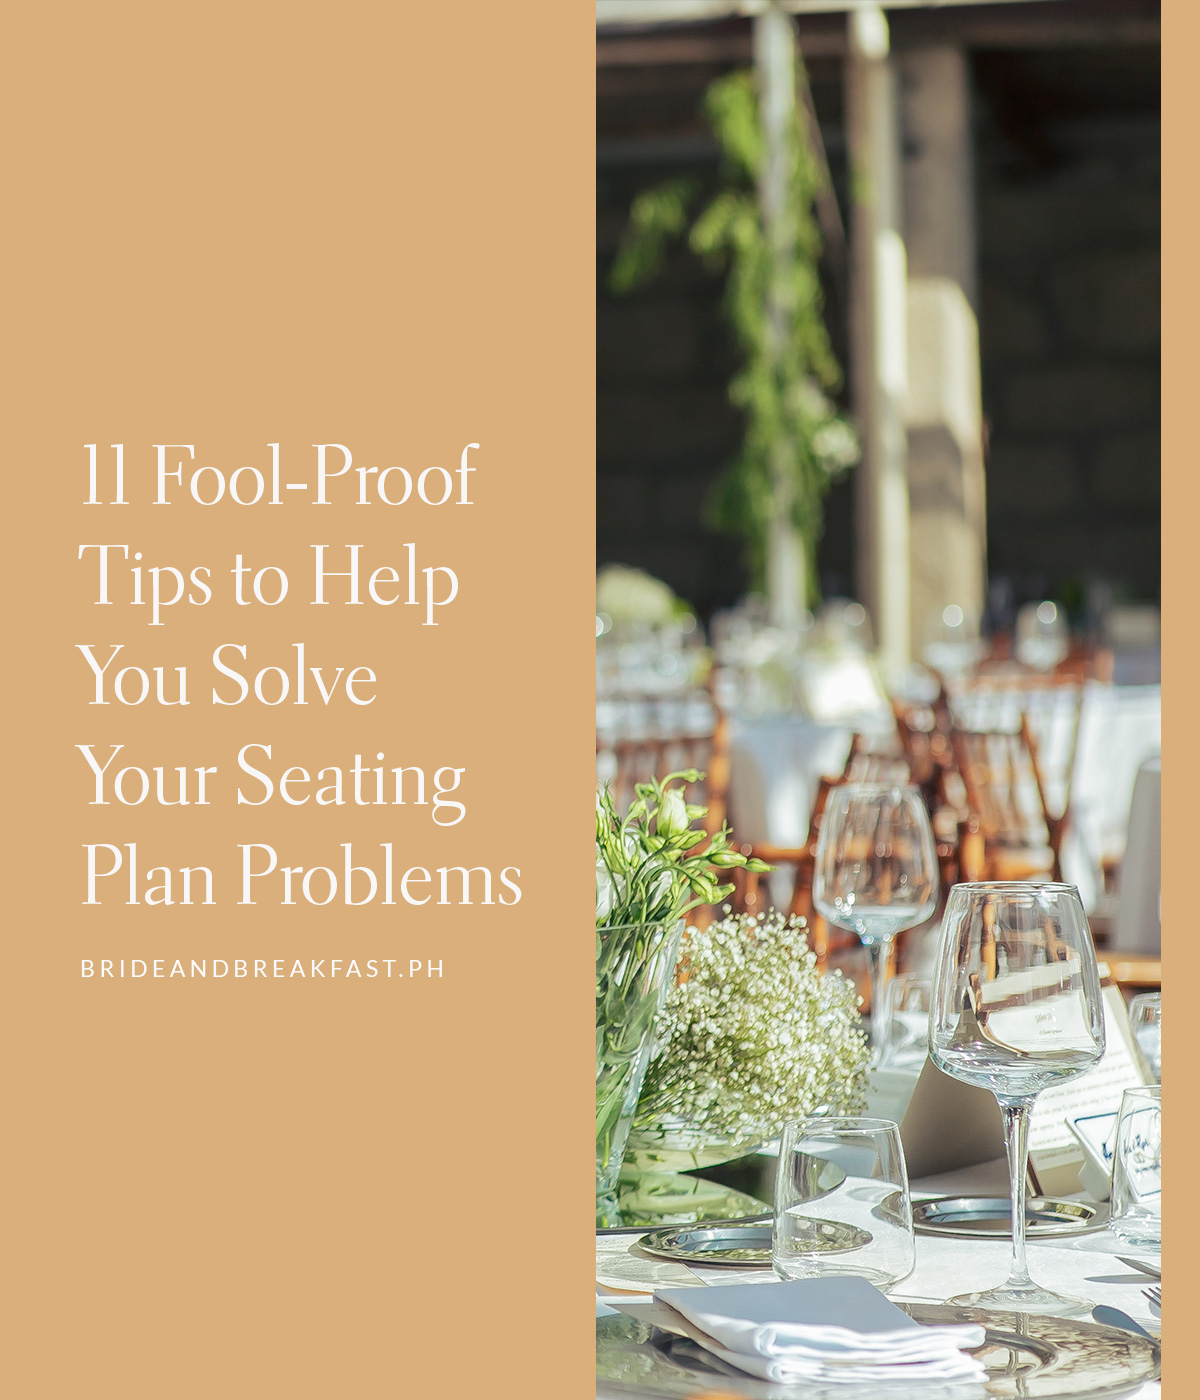 11 Fool-Proof Tips to Help You Solve Your Seating Plan Problems